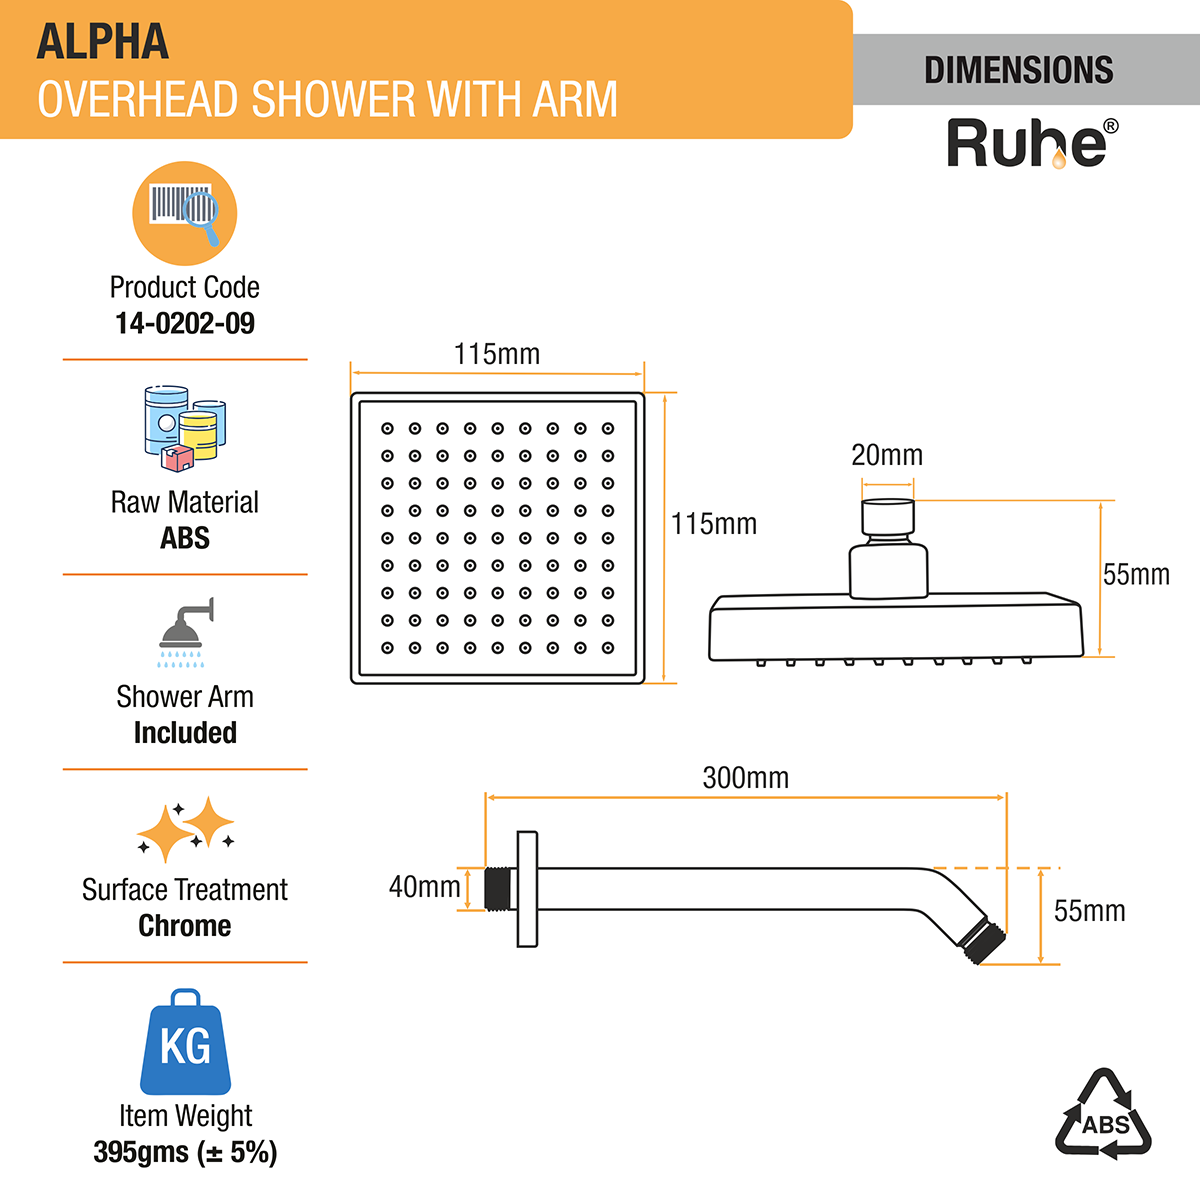 Alpha Overhead Shower (4.5 x 4.5 Inches) with Shower Arm (12 Inches) dimensions and size